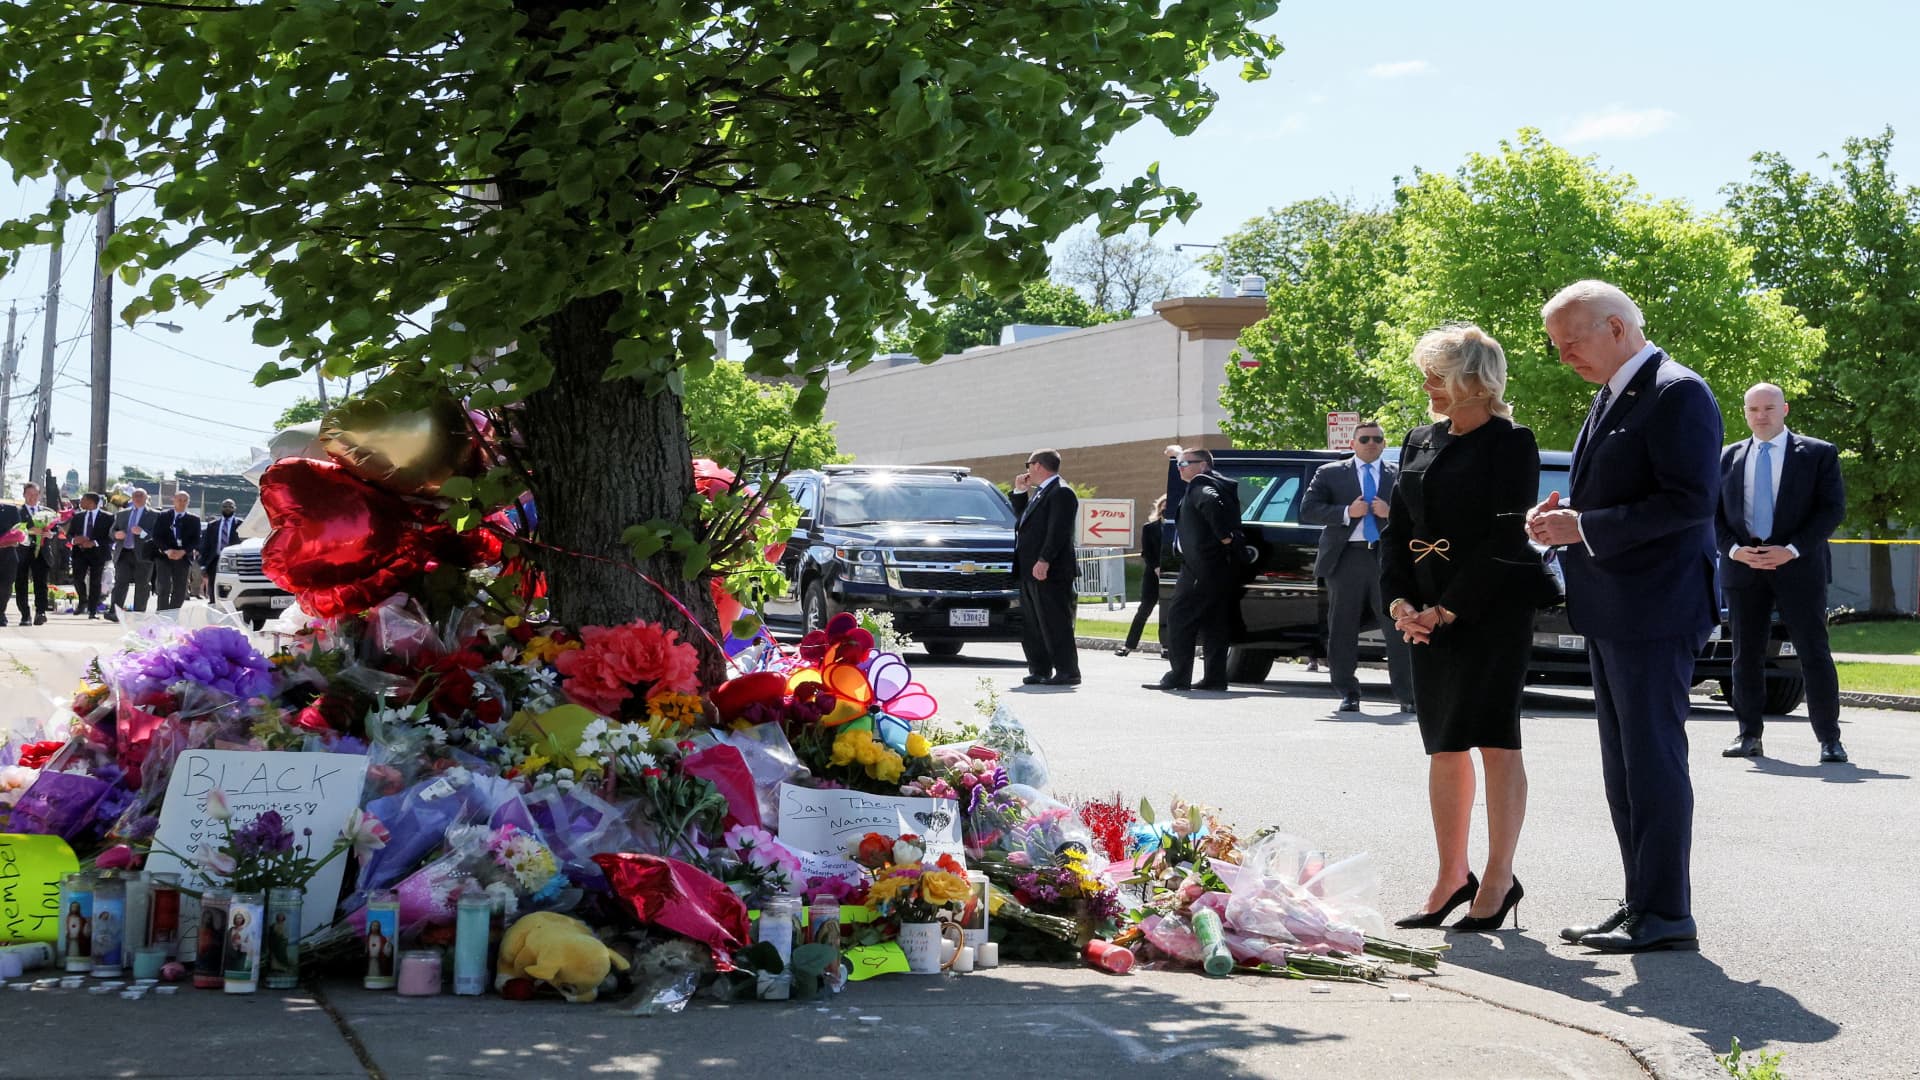 U.S. President Joe Biden and first lady Jill Biden pay their respects to the 10 people killed in a mass shooting by a gunman authorities say was motivated by racism, at the TOPS Friendly Markets memorial site in Buffalo, NY, U.S. May 17, 2022. 